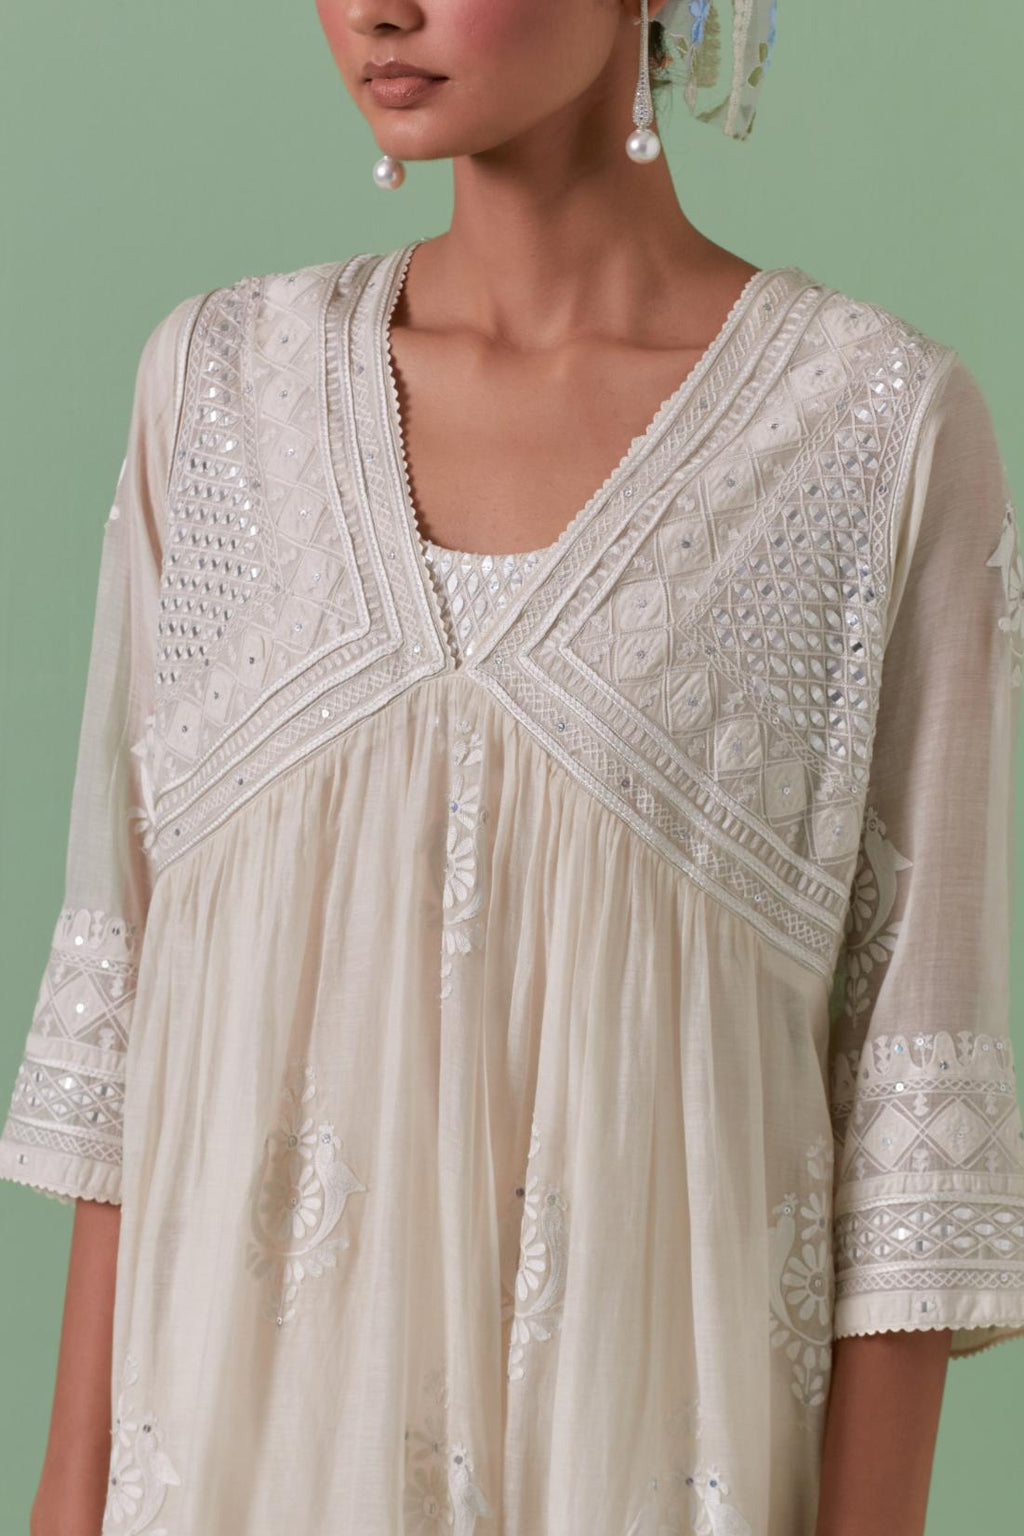 Off-white cotton chanderi embroidered kurta set dress with V neck, yoke and fine gathers at empire line.